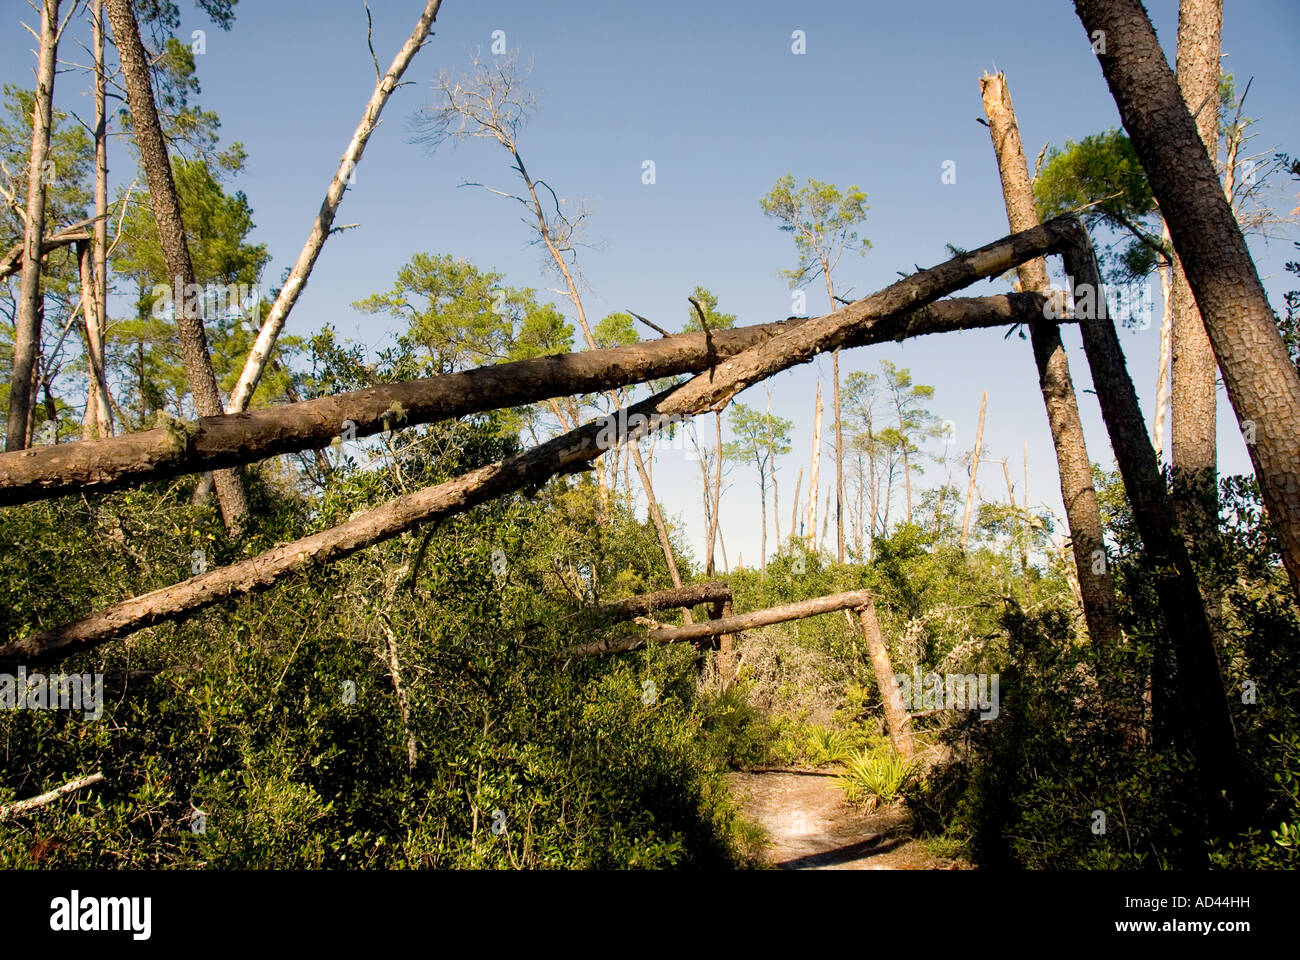 hirricane damage Fallen trees snapped by storm wind destruction nature weather Stock Photo